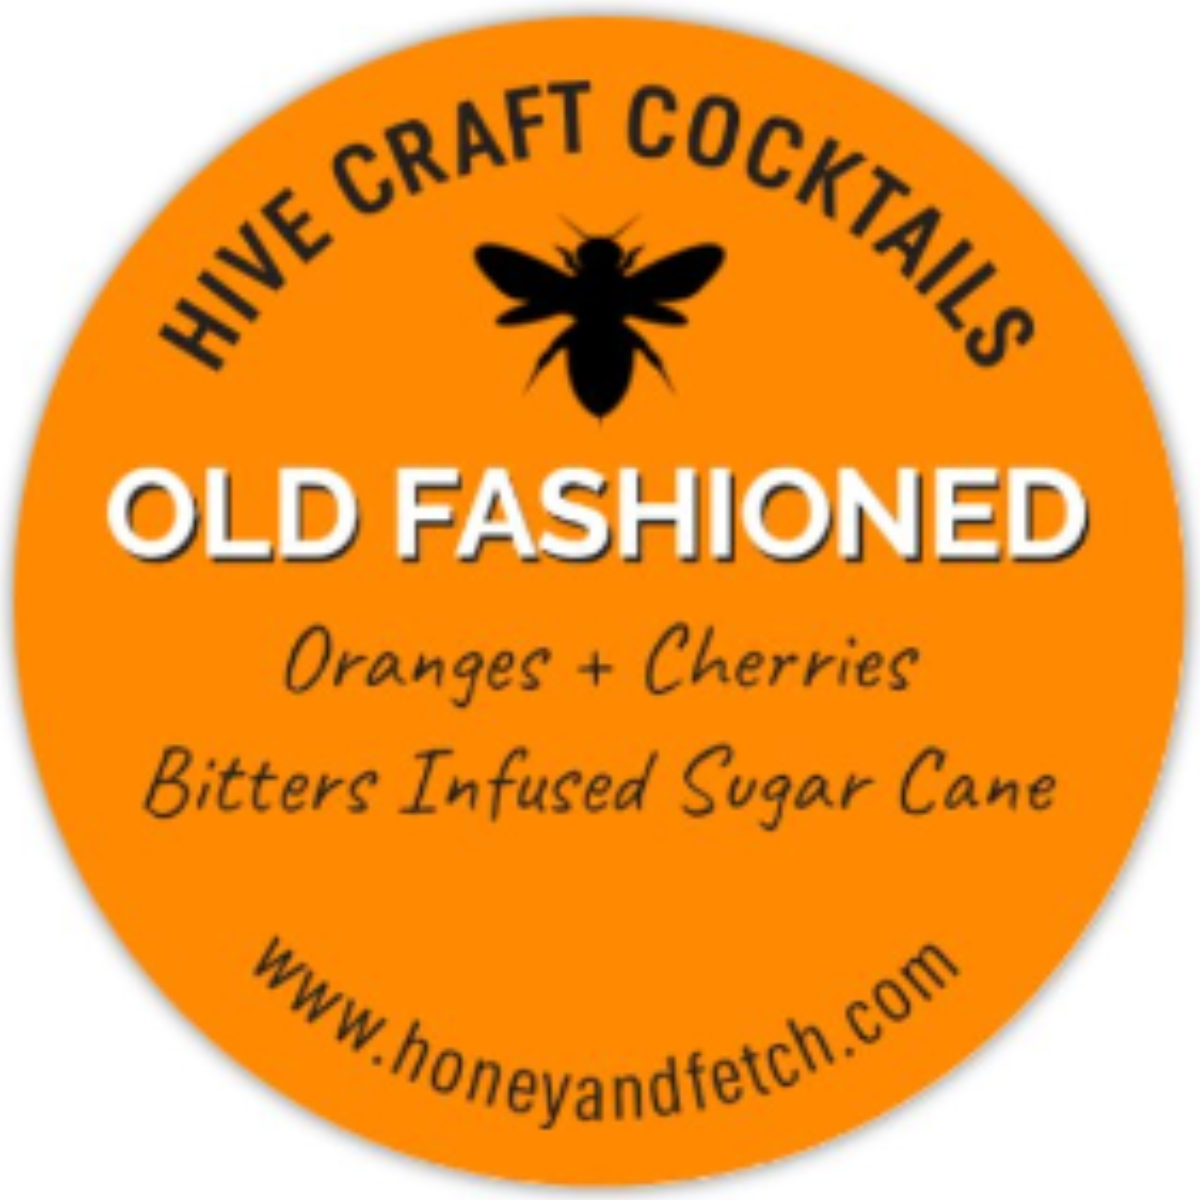 Master the Art of the Old-Fashioned with Hive Craft's Premium Cocktail Kit: Citrus & Cherry Edition